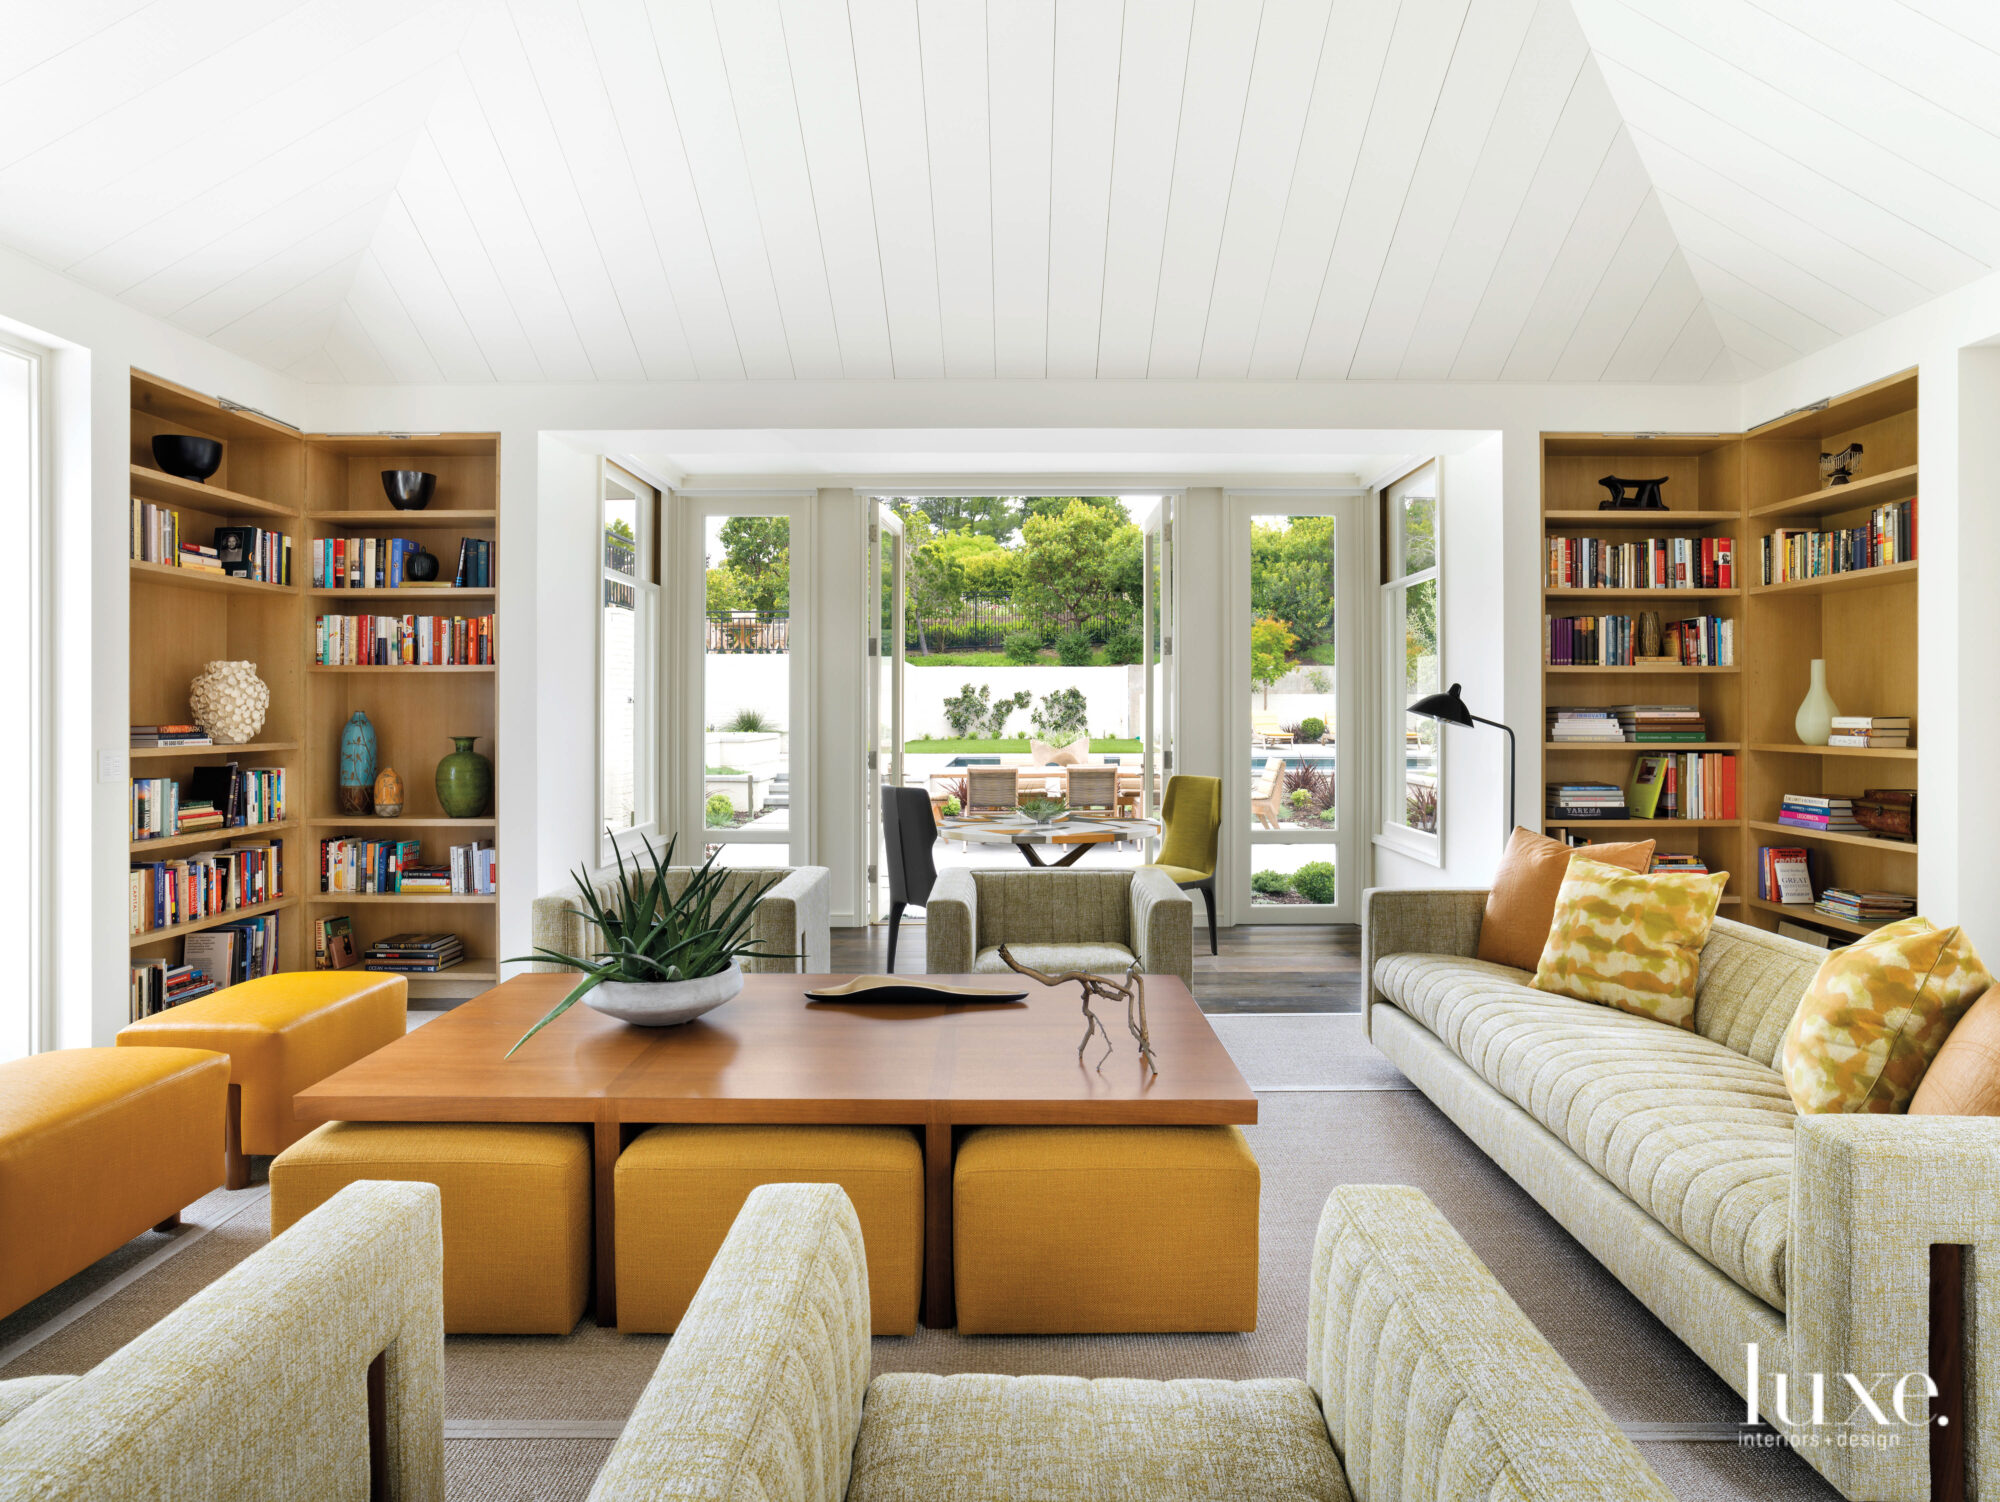 The family room's central piece is a large coffee table that has yellow stools underneath.